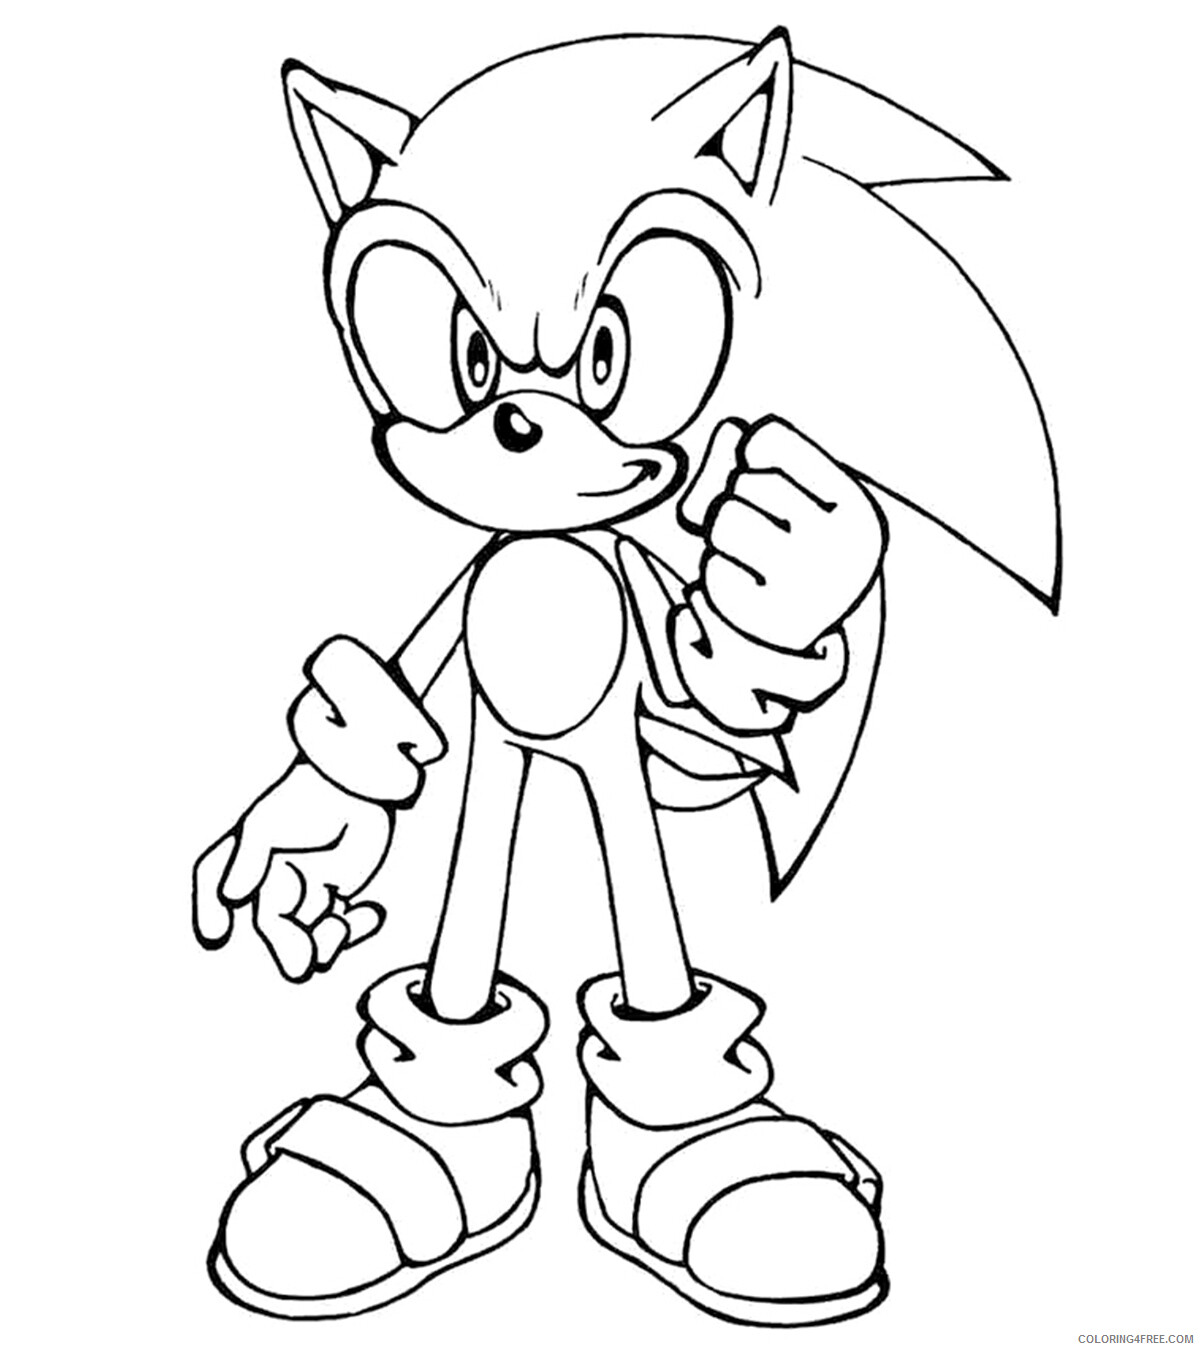 Amy Sonic Coloring Pages Printable Sheets 21 Sonic The Hedgehog Coloring 2021 a 5629 Coloring4free